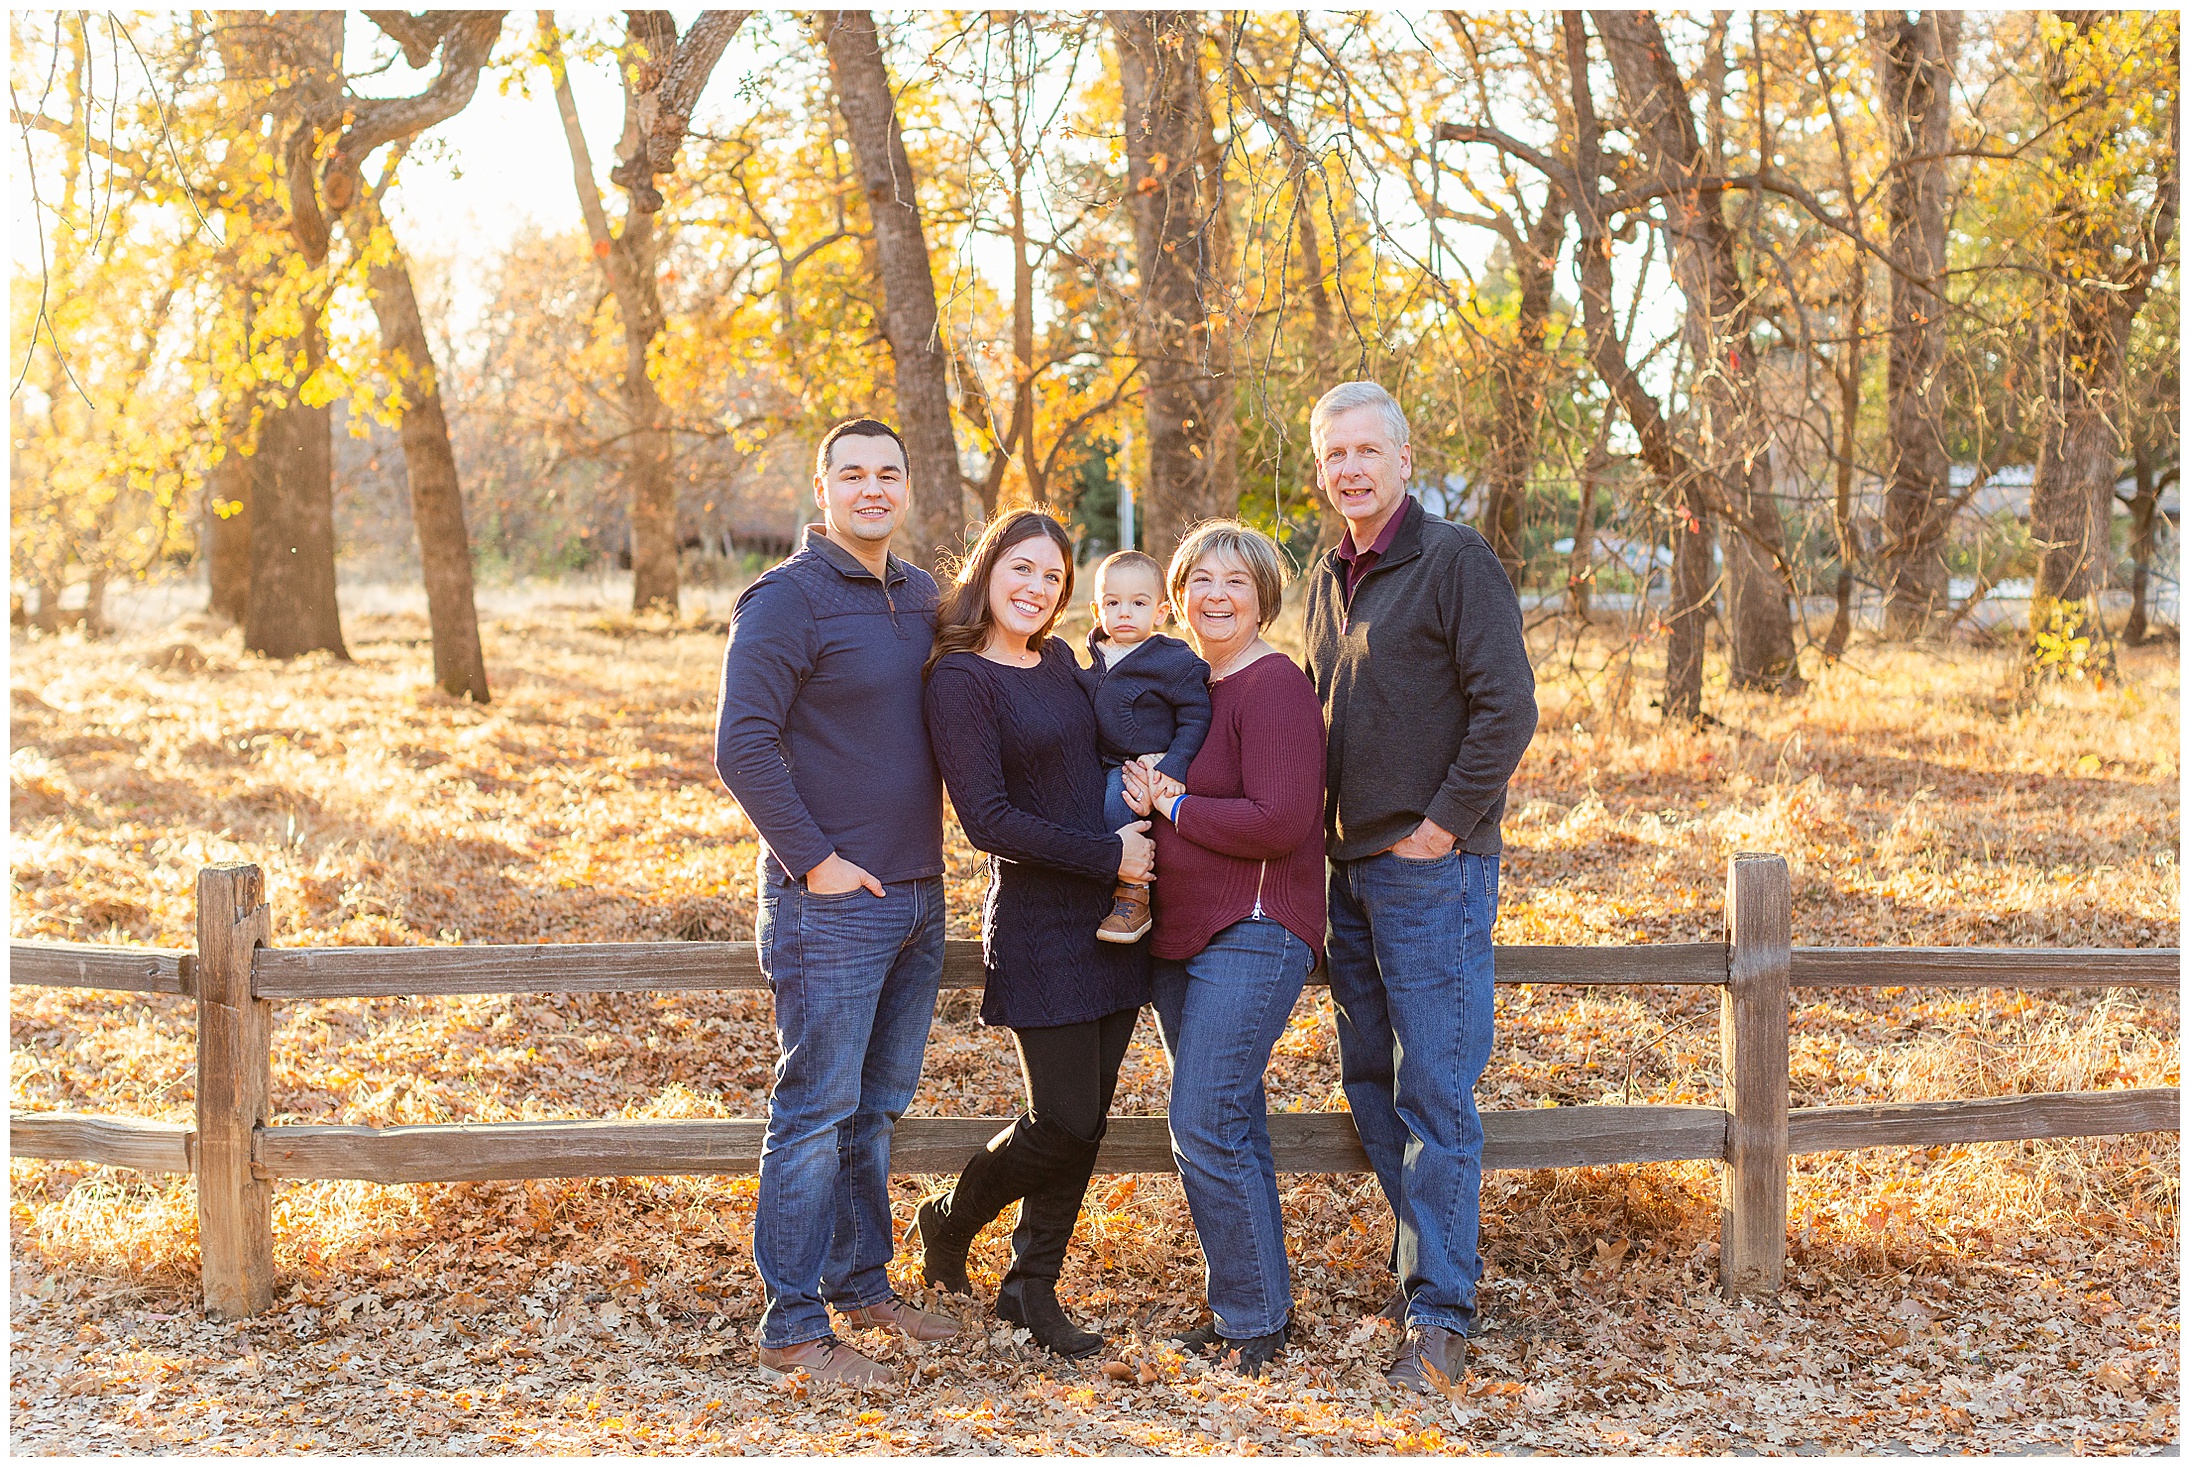 Lower Bidwell Park Extended Family Session Chico CA Grandparents,